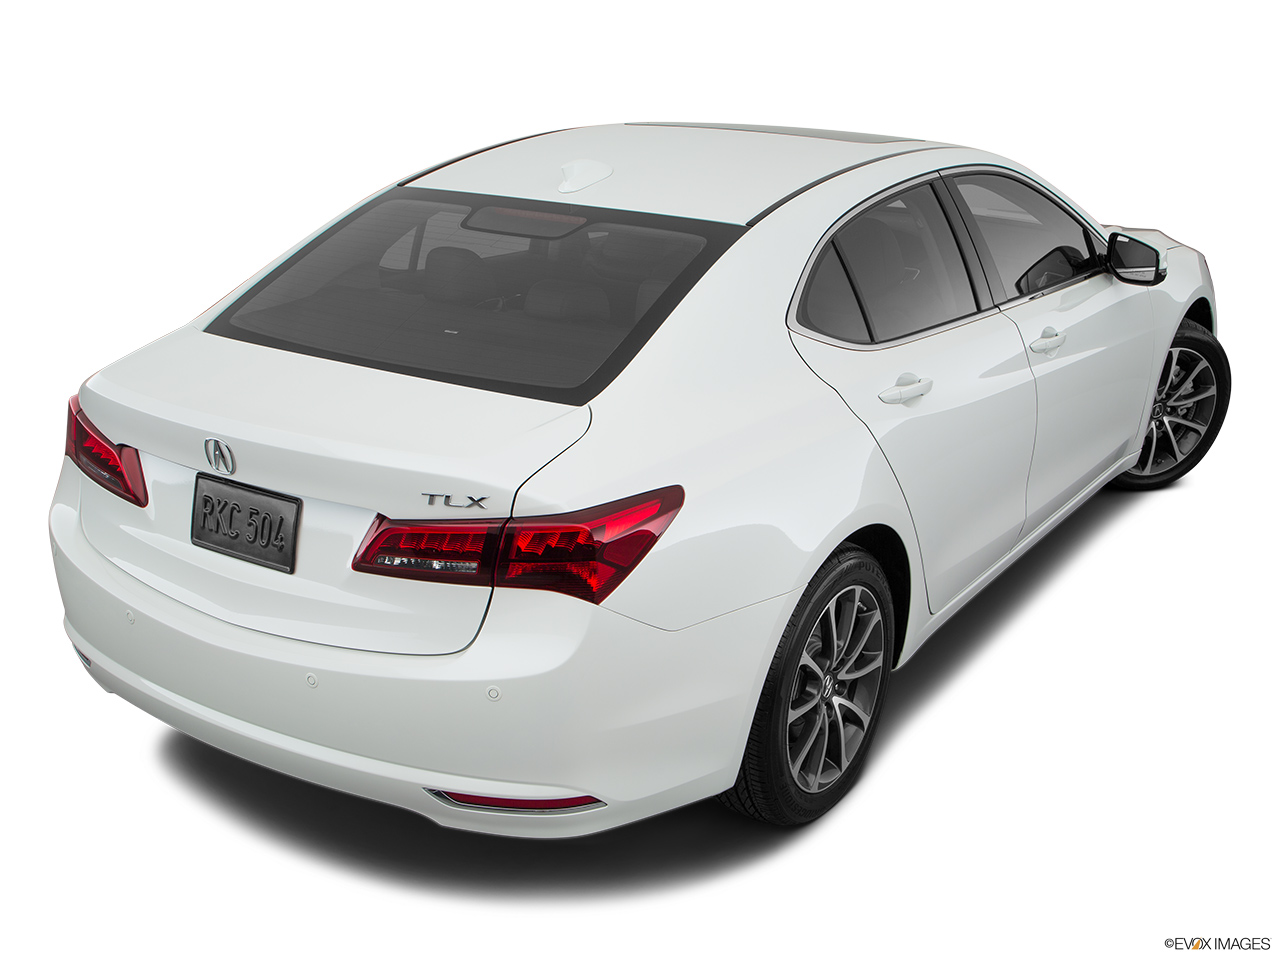 2017 Acura TLX 3.5L Rear 3/4 angle view. 